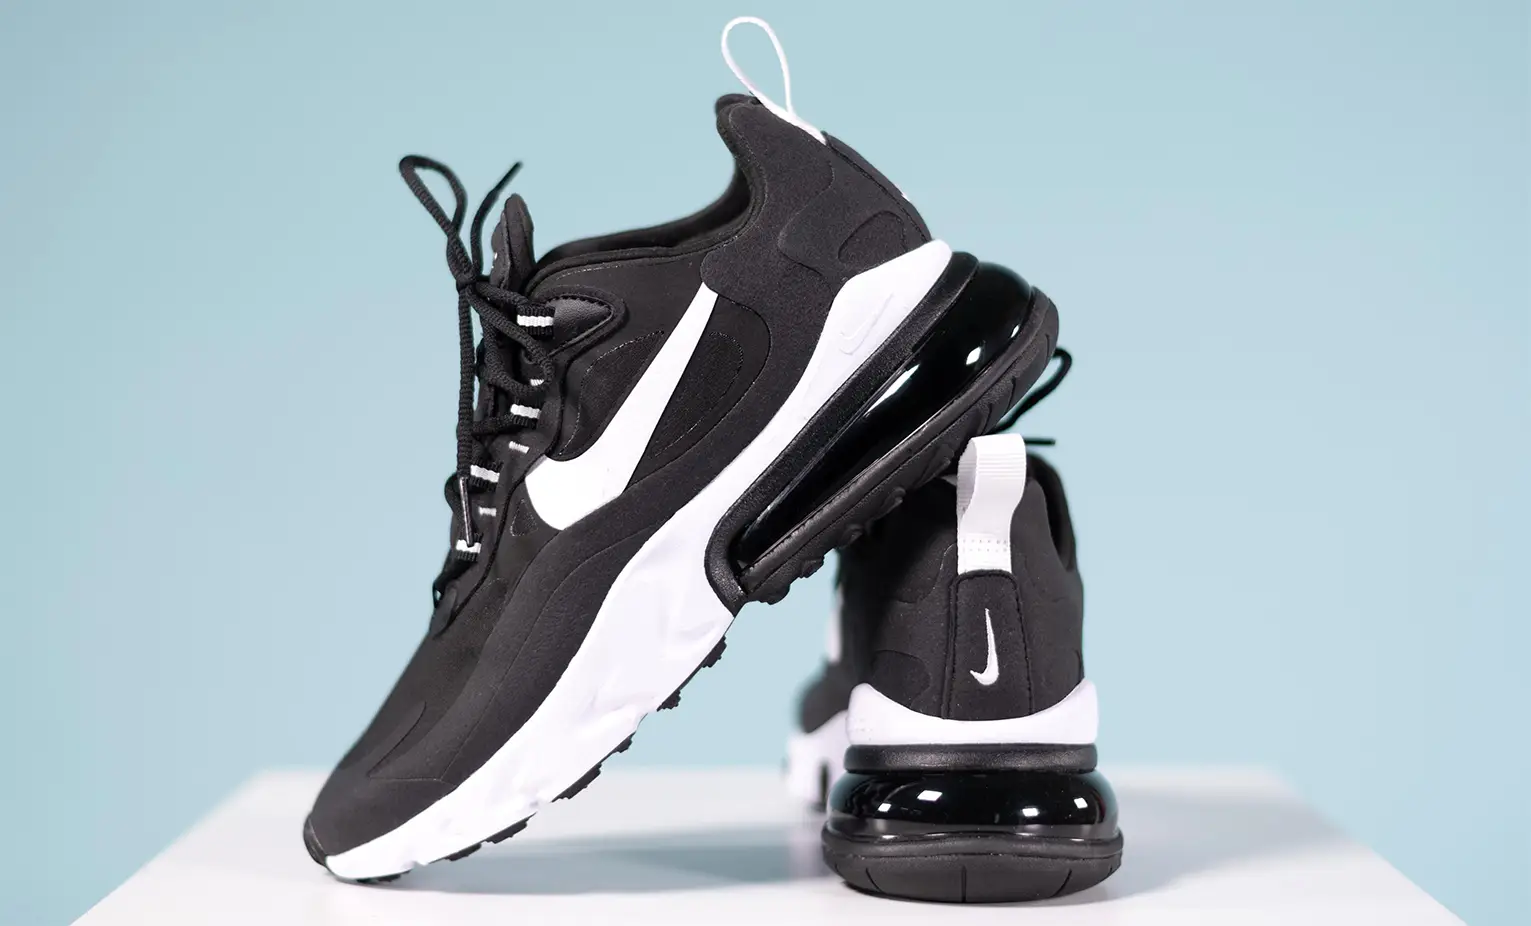 Does The Nike Air Max 270 React Fit True To Size?